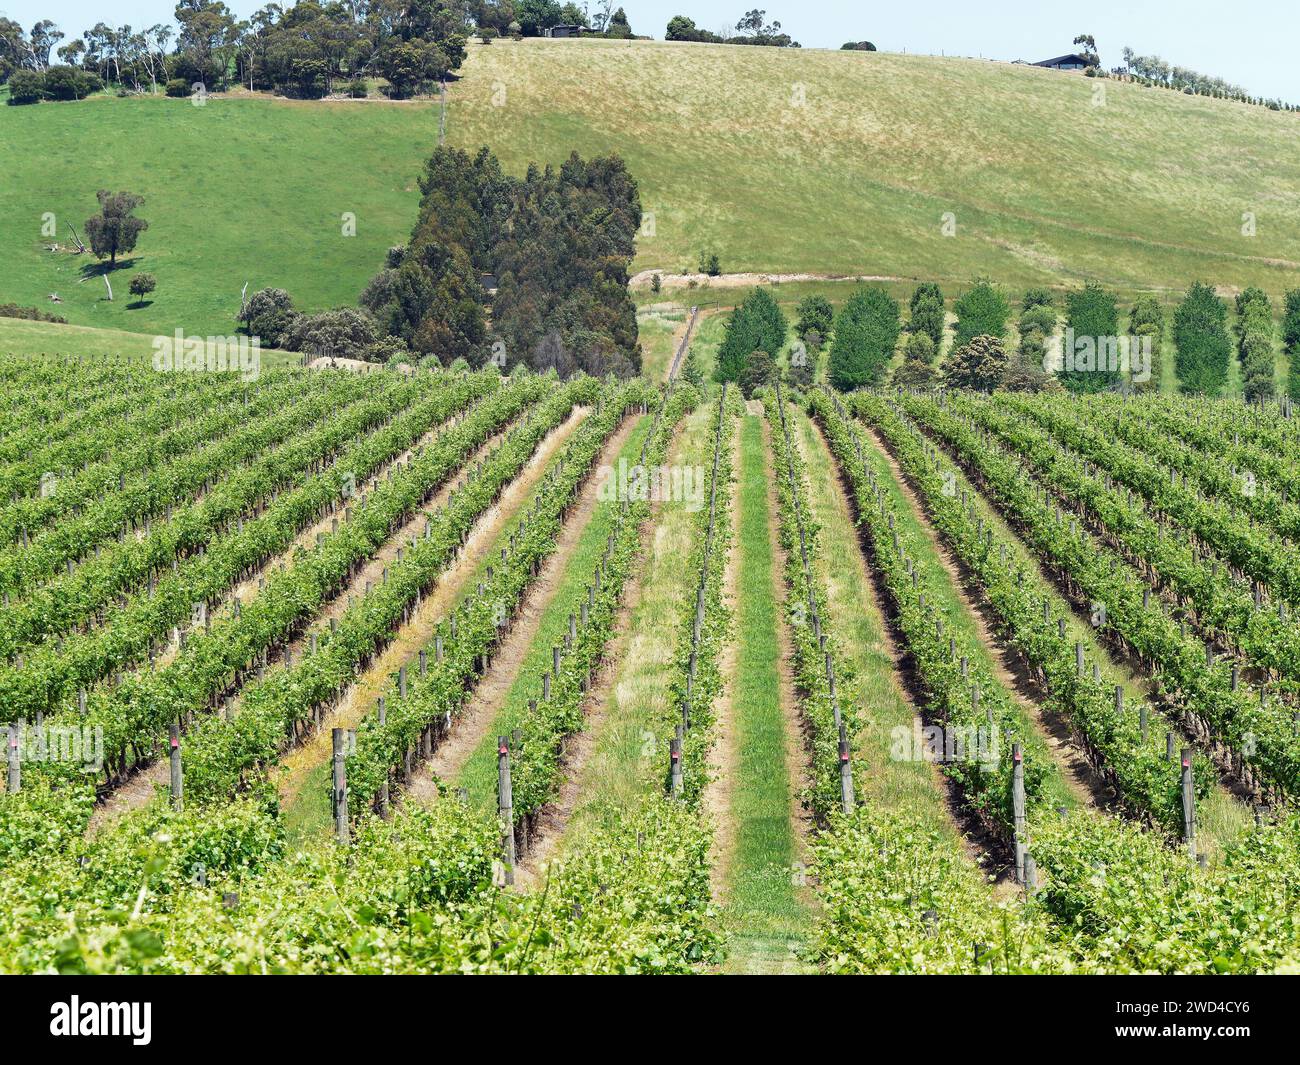 View looking down rows of vines in the Yarra Valley Victoria Australia Stock Photo